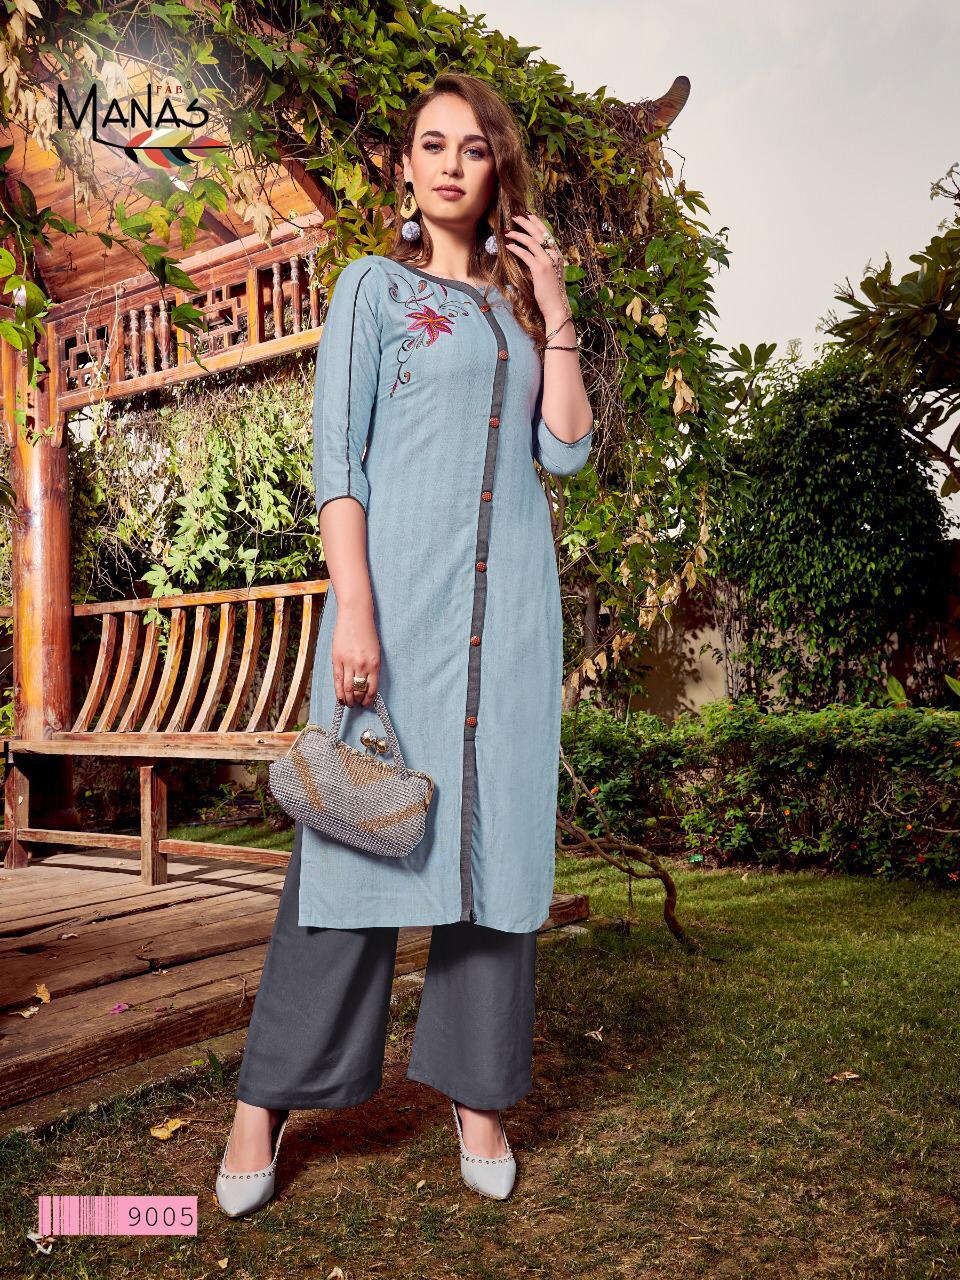 Manas Presents Hirwa Summer Special Special Rayon Kurtis With Plazzo Collection At Wholesale